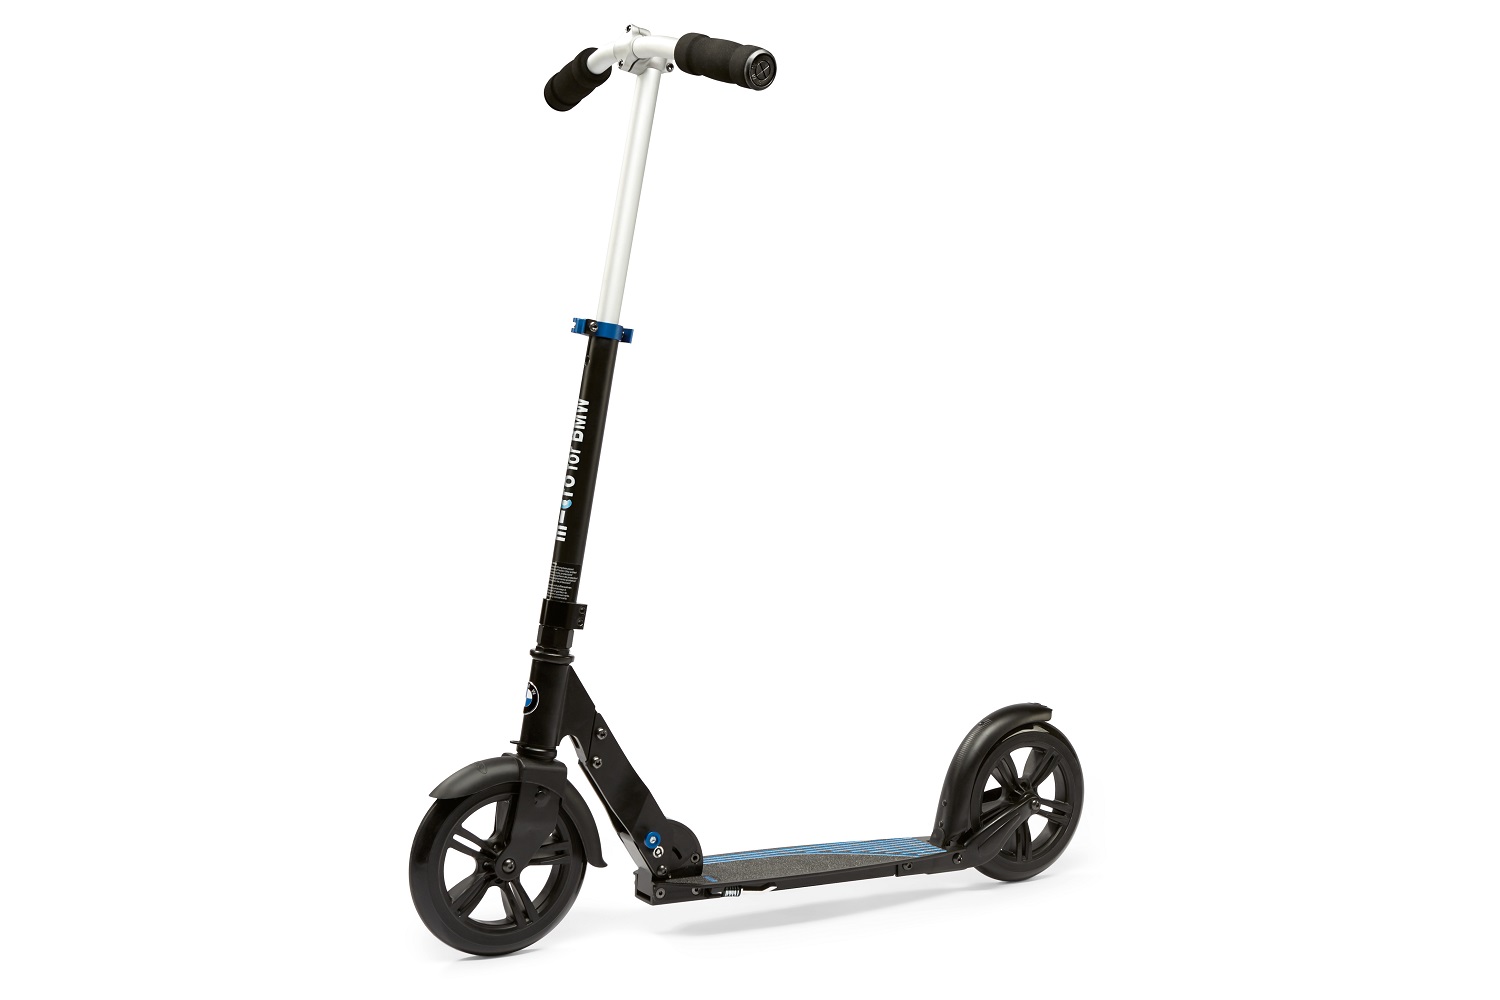 BMW Mobility scooters